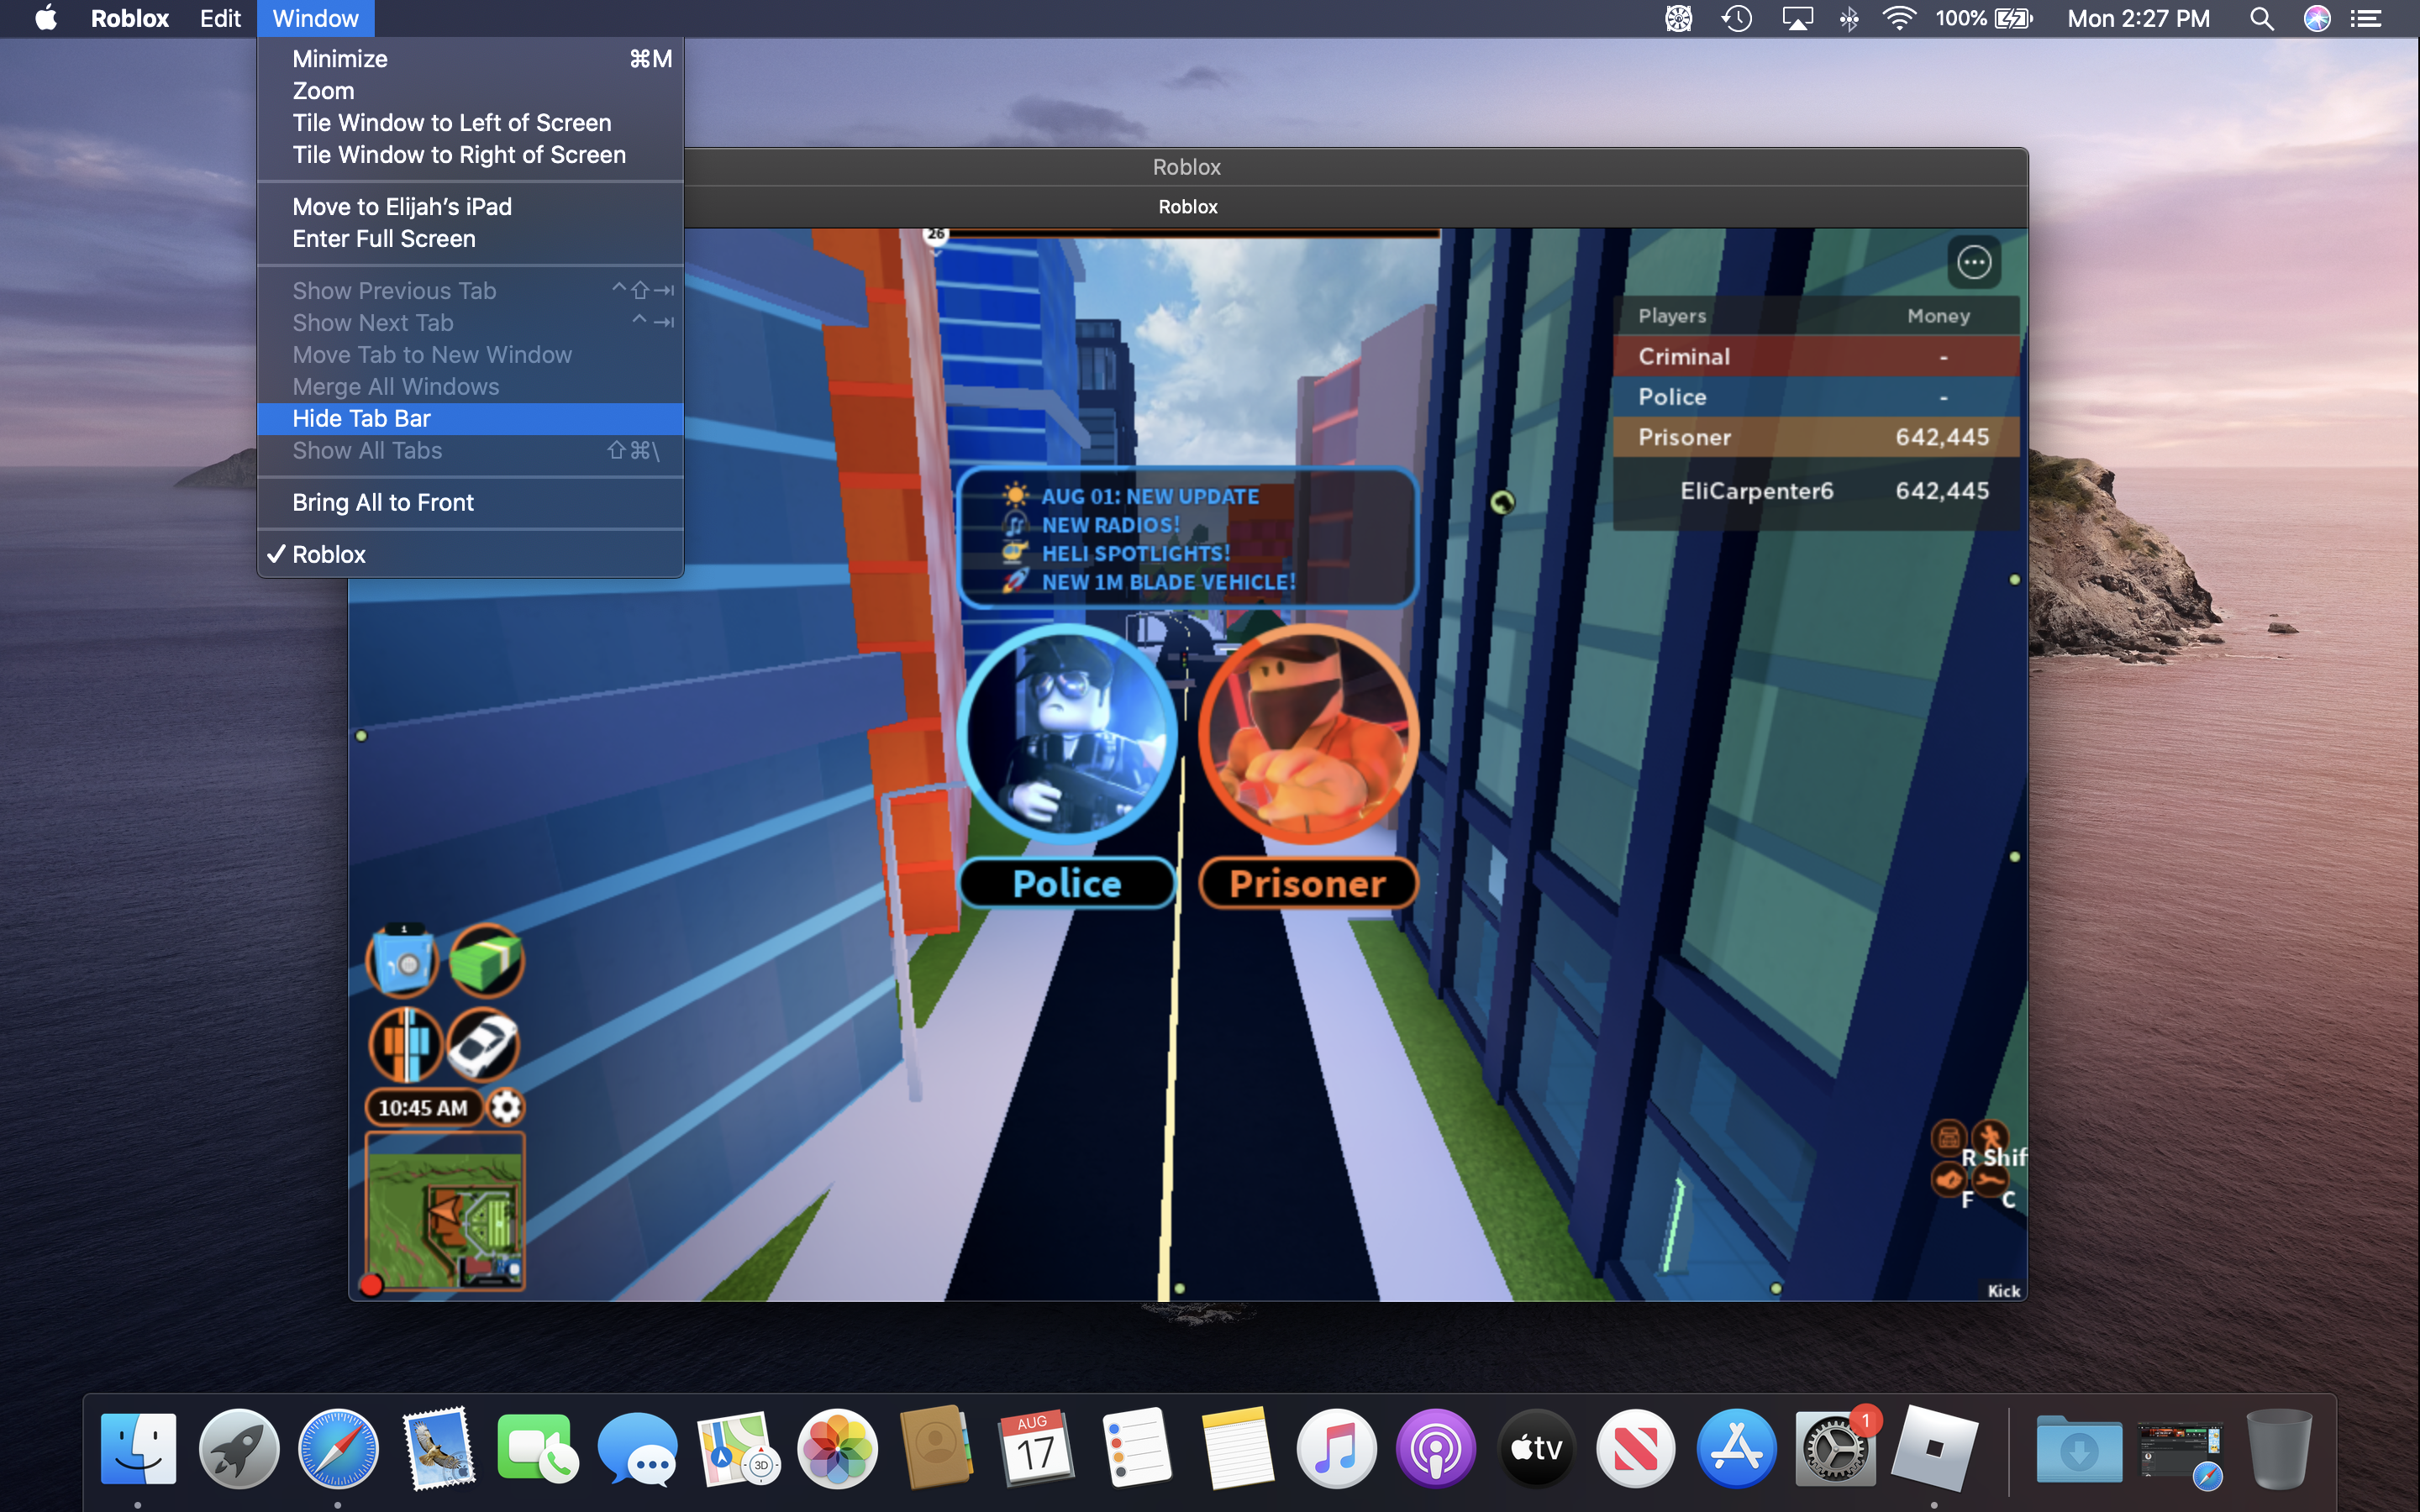 How to Control Roblox on Mac? 7